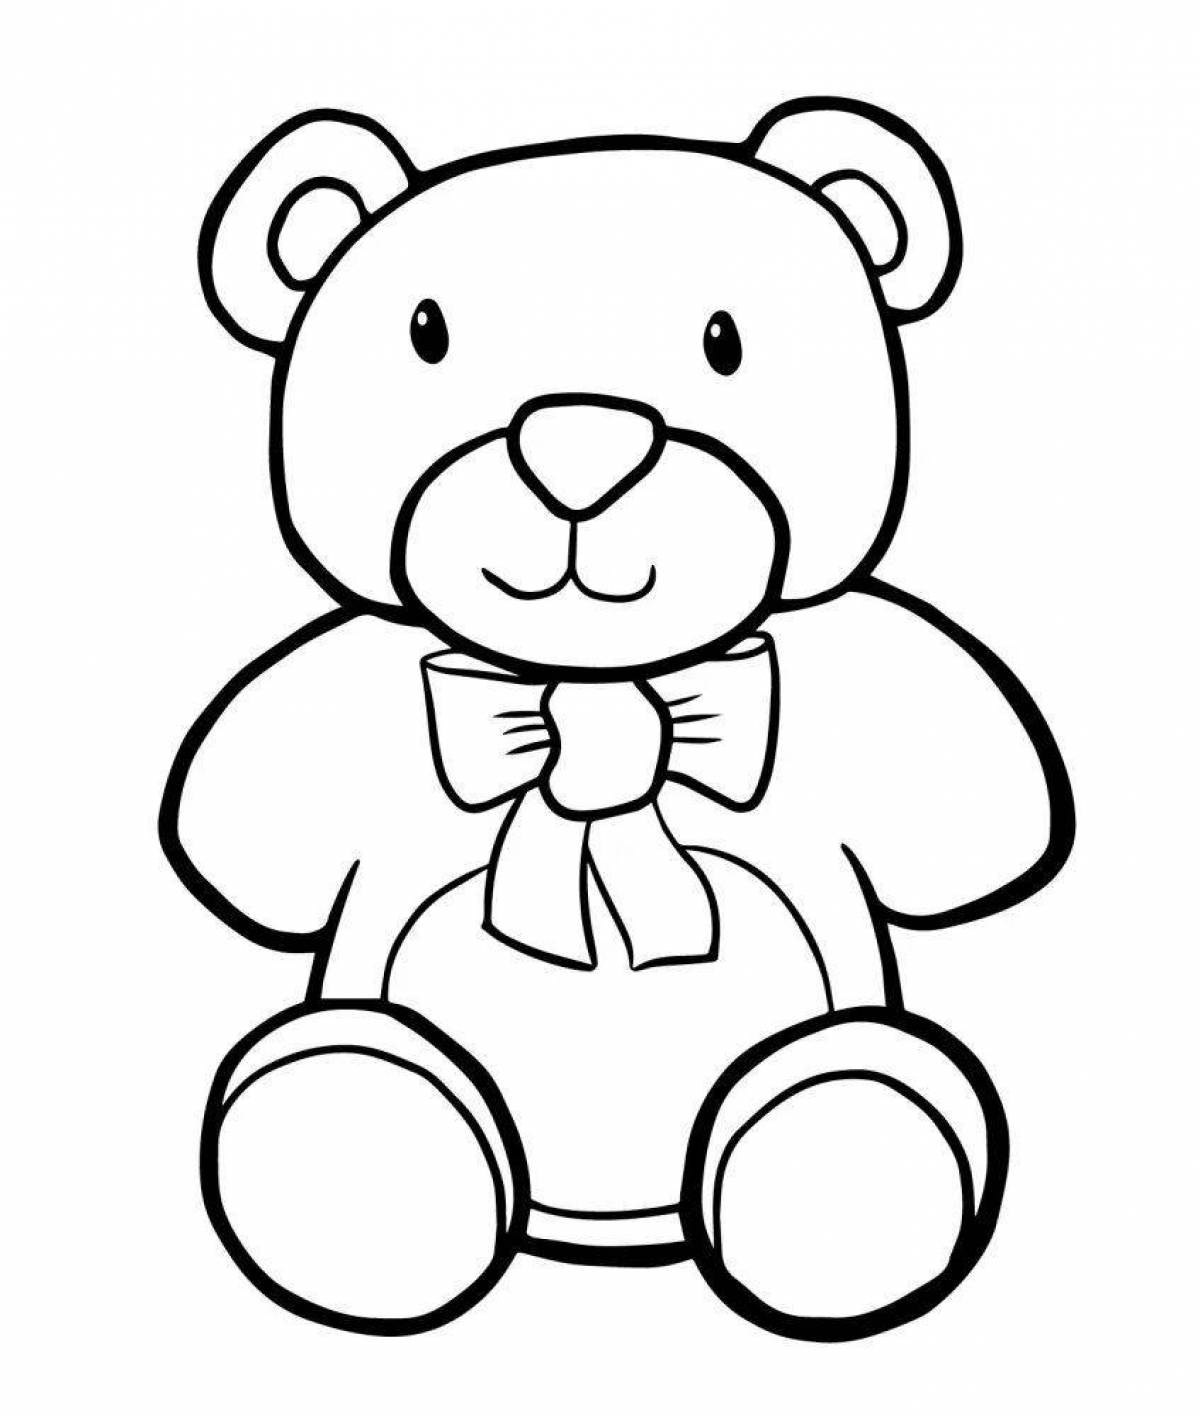 Curious teddy bear coloring book for kids